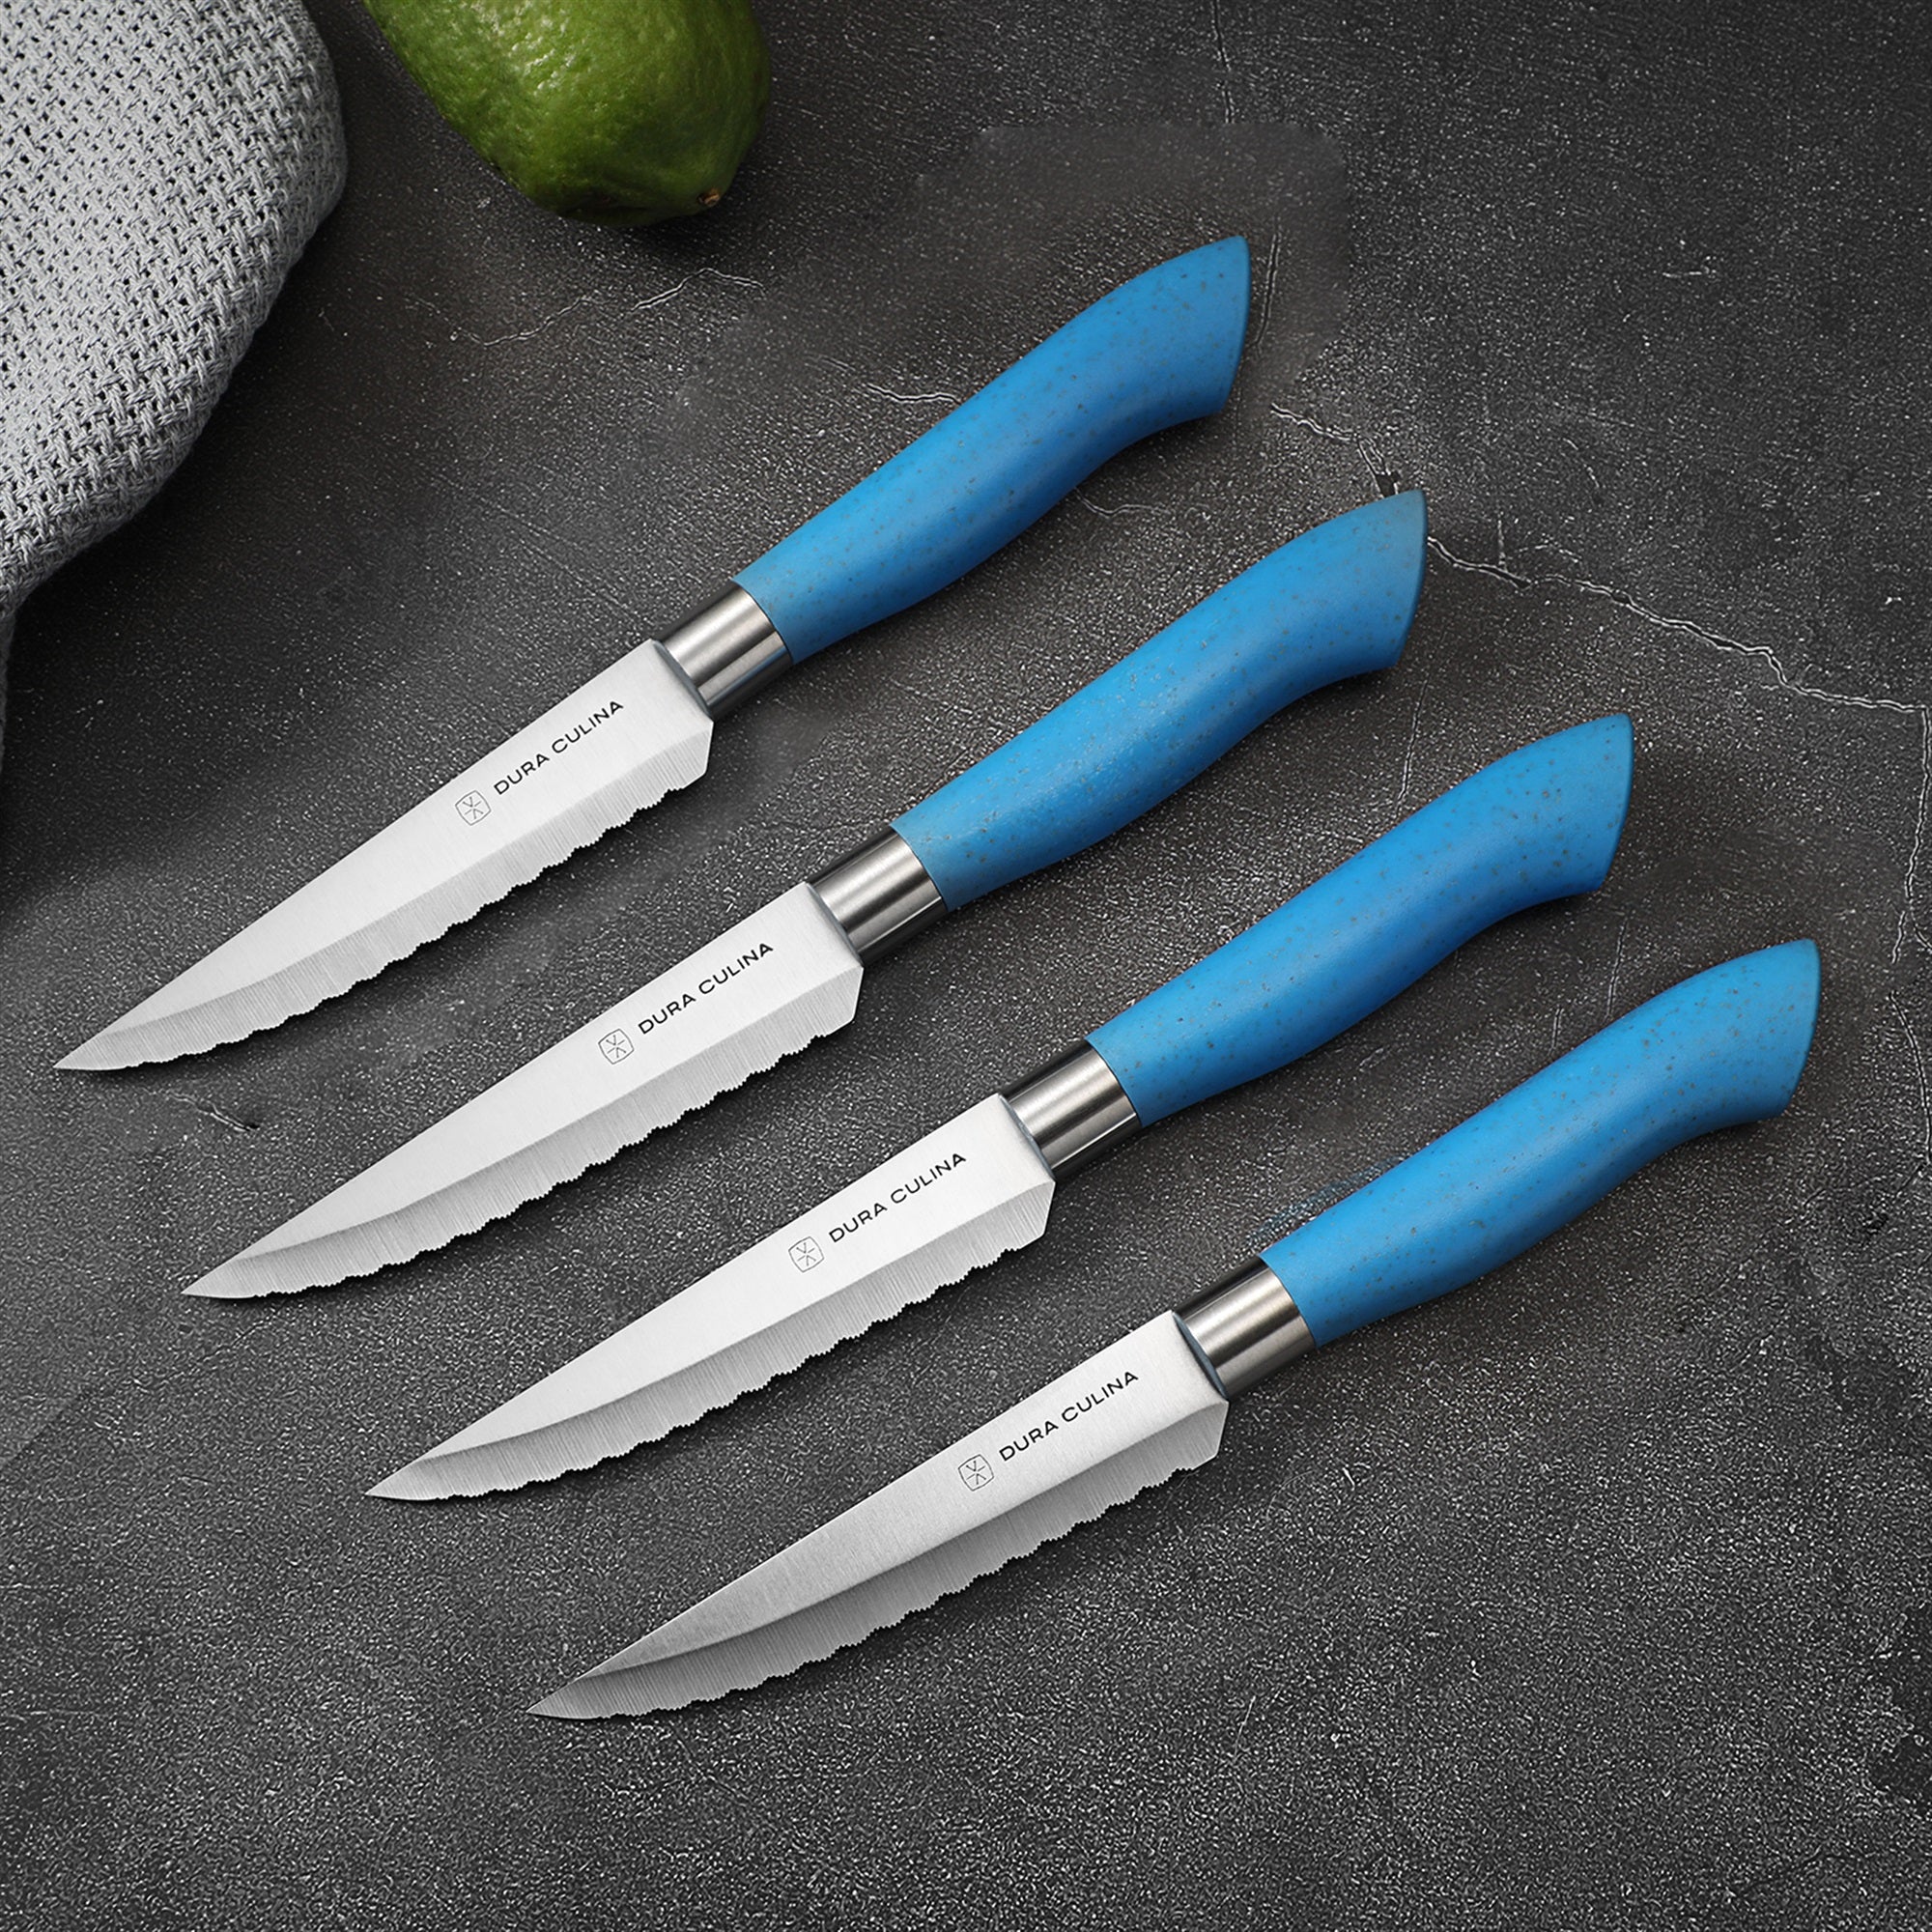 Dura Living EcoCut 8-Piece Steak Knife Set - High Carbon Micro Serrated Stainless Steel Blades, Eco-Friendly Handles - Blue - 8 Piece